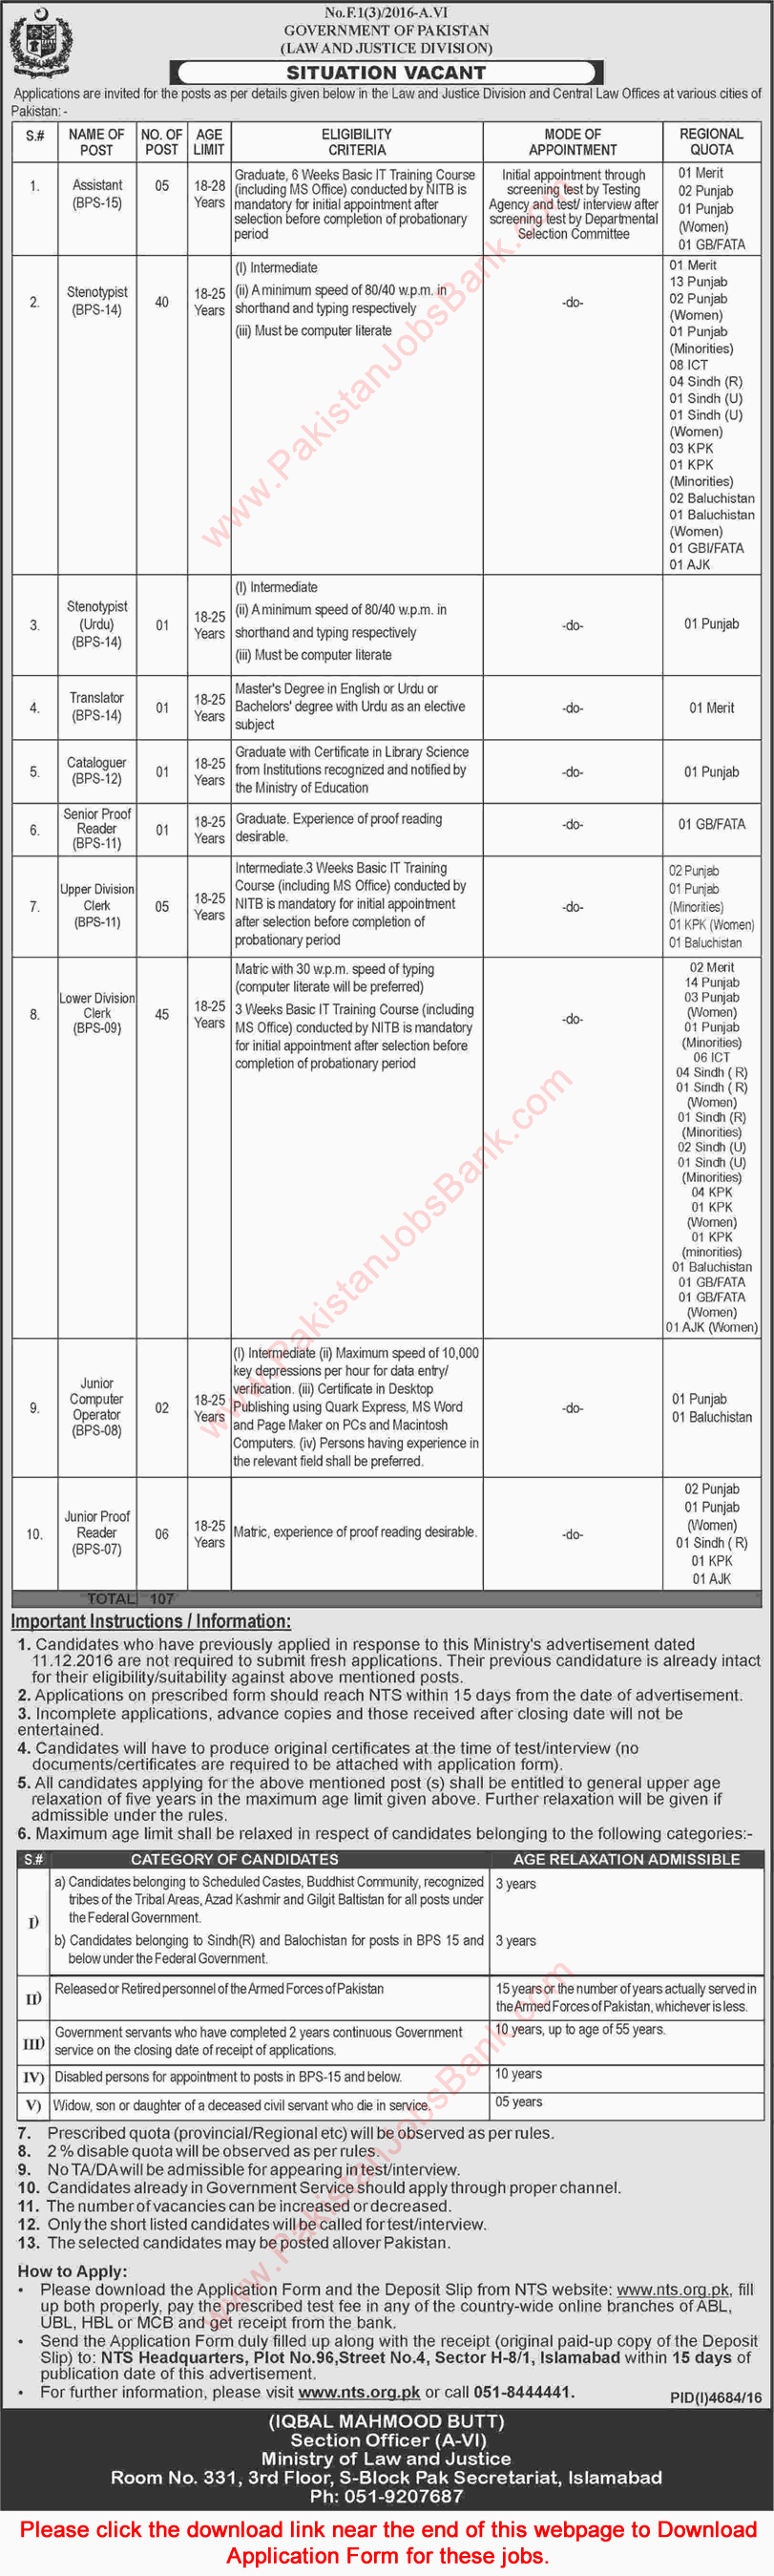 Ministry of Law and Justice Jobs 2017 March NTS Application Form Clerks, Stenotypists & Others Latest